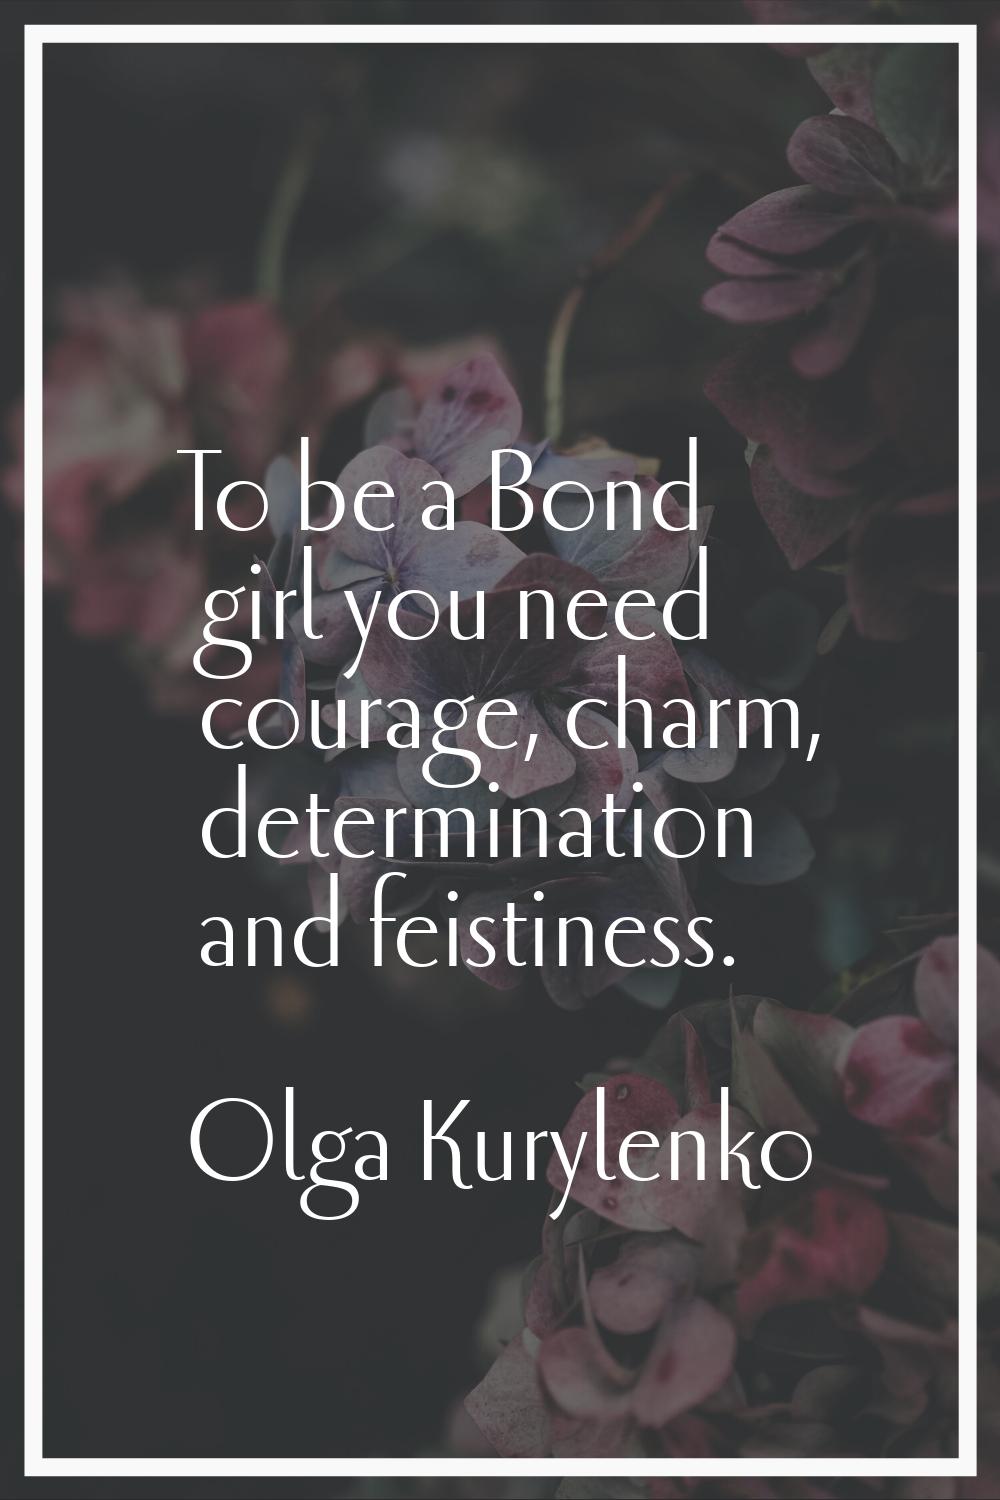 To be a Bond girl you need courage, charm, determination and feistiness.